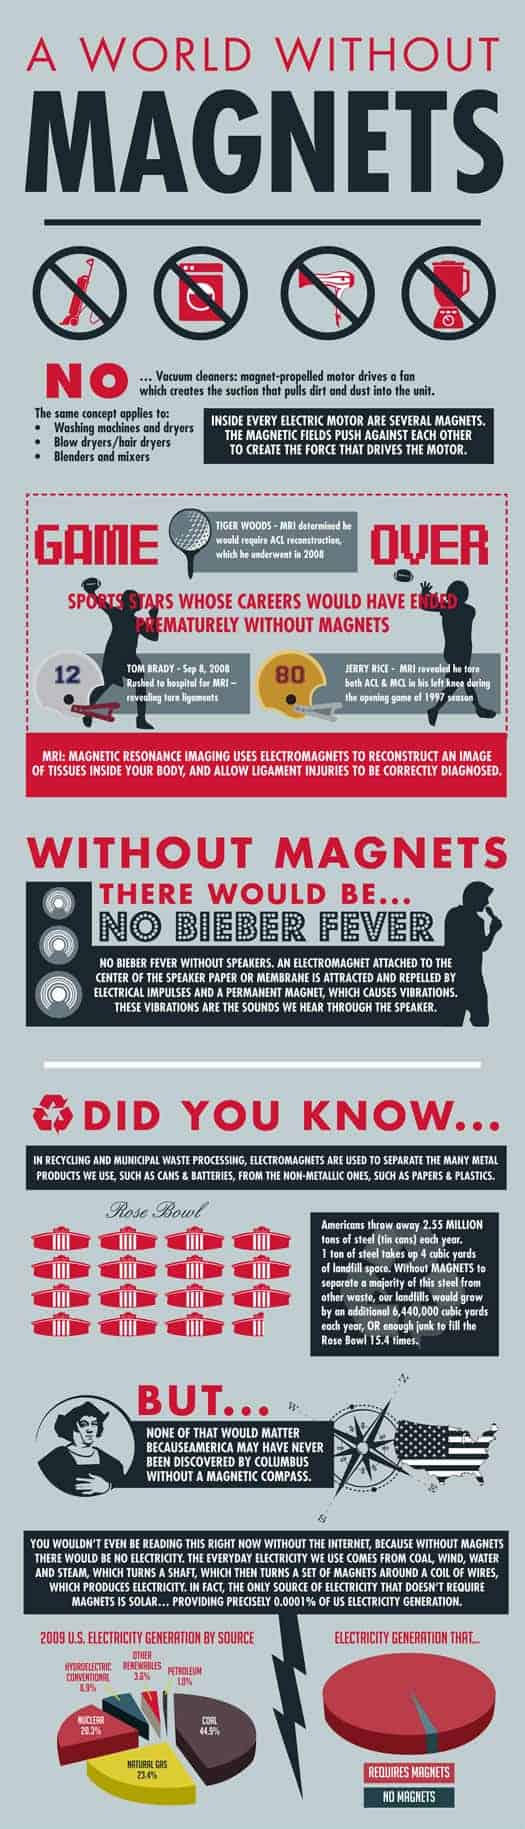 A World Without Magnets